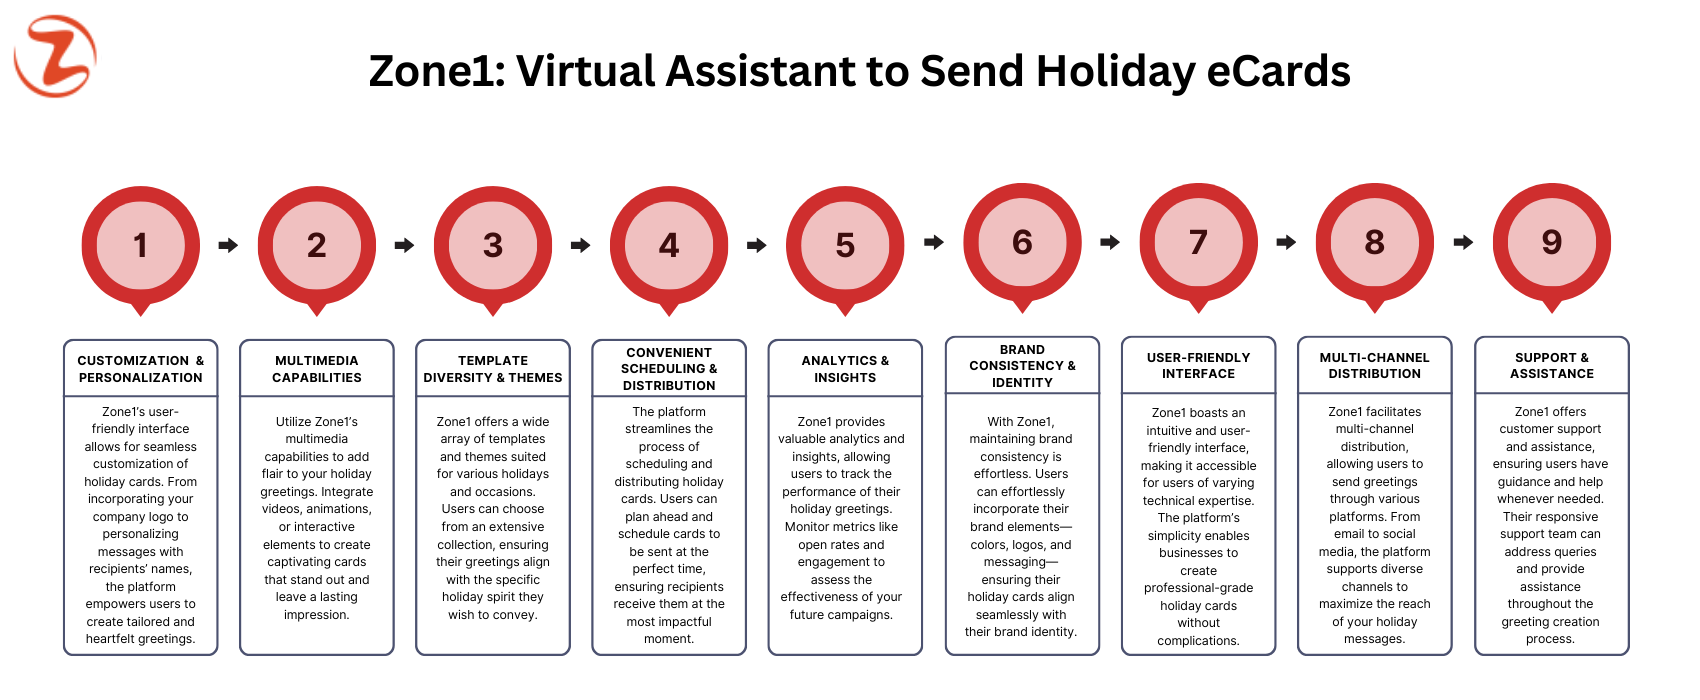 Zone1 Virtual Assistant to Send Holiday eCards